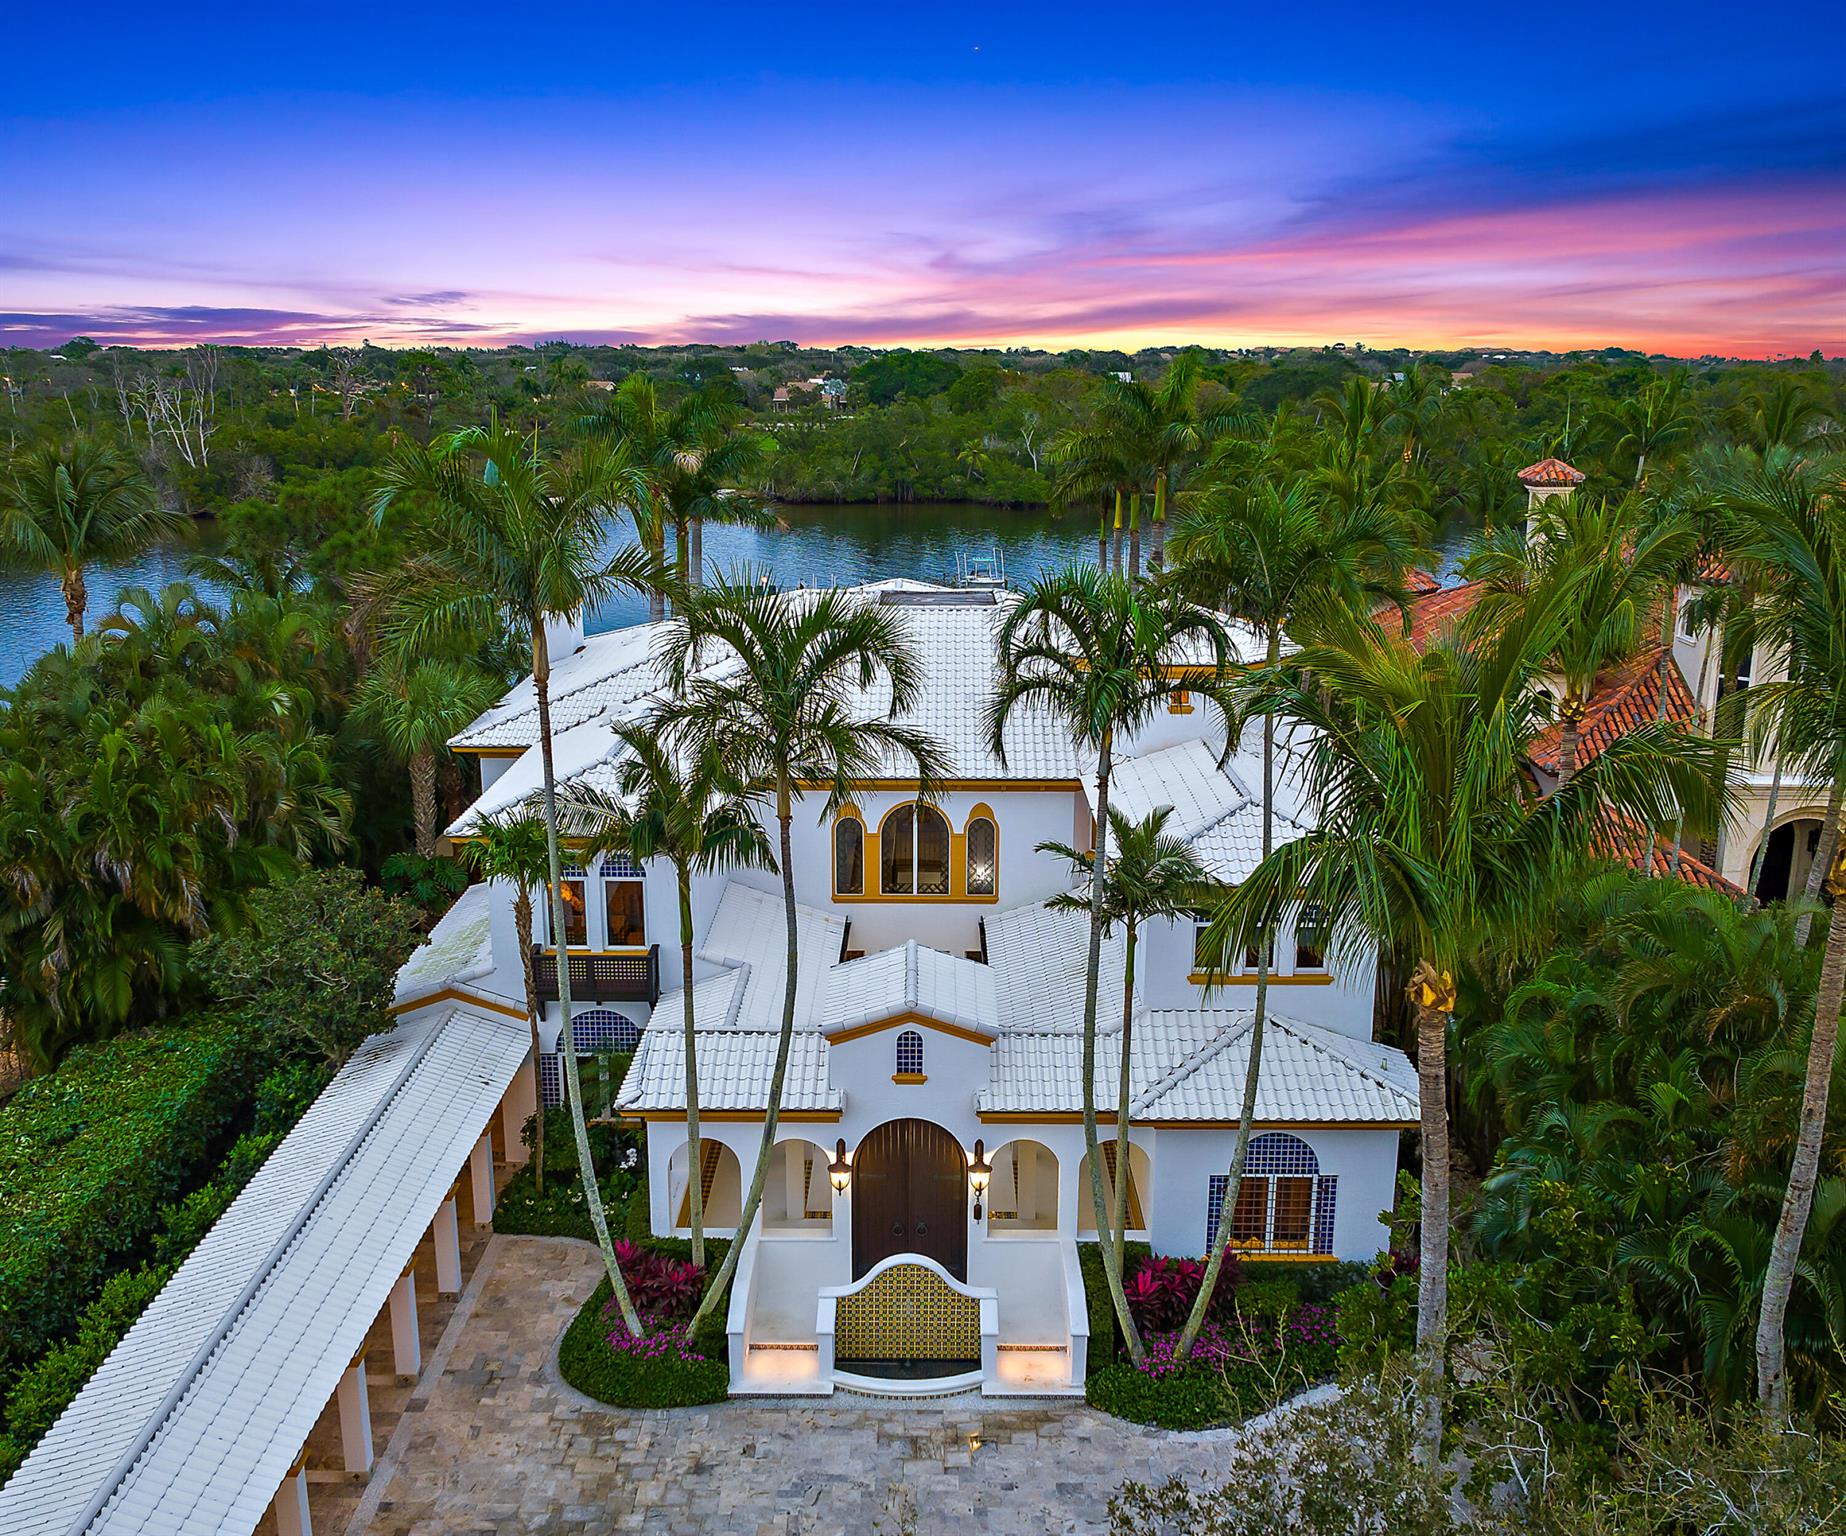 Extraordinary Intracostal Home For Sale in Palm Beach Gardens. Immerse yourself in the epitome of refined living, where every detail has been meticulously crafted to create a Moroccan-inspired haven. This 5 bedroom, 8 and a half bathroom home sits on .68 acres and is 7,175 sq ft under air (10,803 sq ft total). With direct access to the intracoastal, no fixed bridges, deep water, over 90 feet of direct waterfront, and a 120-foot dock, this home is well-equipped for the boat of your dreams. Jupiter & Palm Beach inlet less than 10 miles.  Remodeled in 2018, features include a newly added in-law suite, pool cabana, covered porch, balcony, an office, two boat lifts, a whole-home generator, brand new pool heater, and top of the line appliances from brands like Sub-Zero, Wolf, Jenn-Air, and Tru